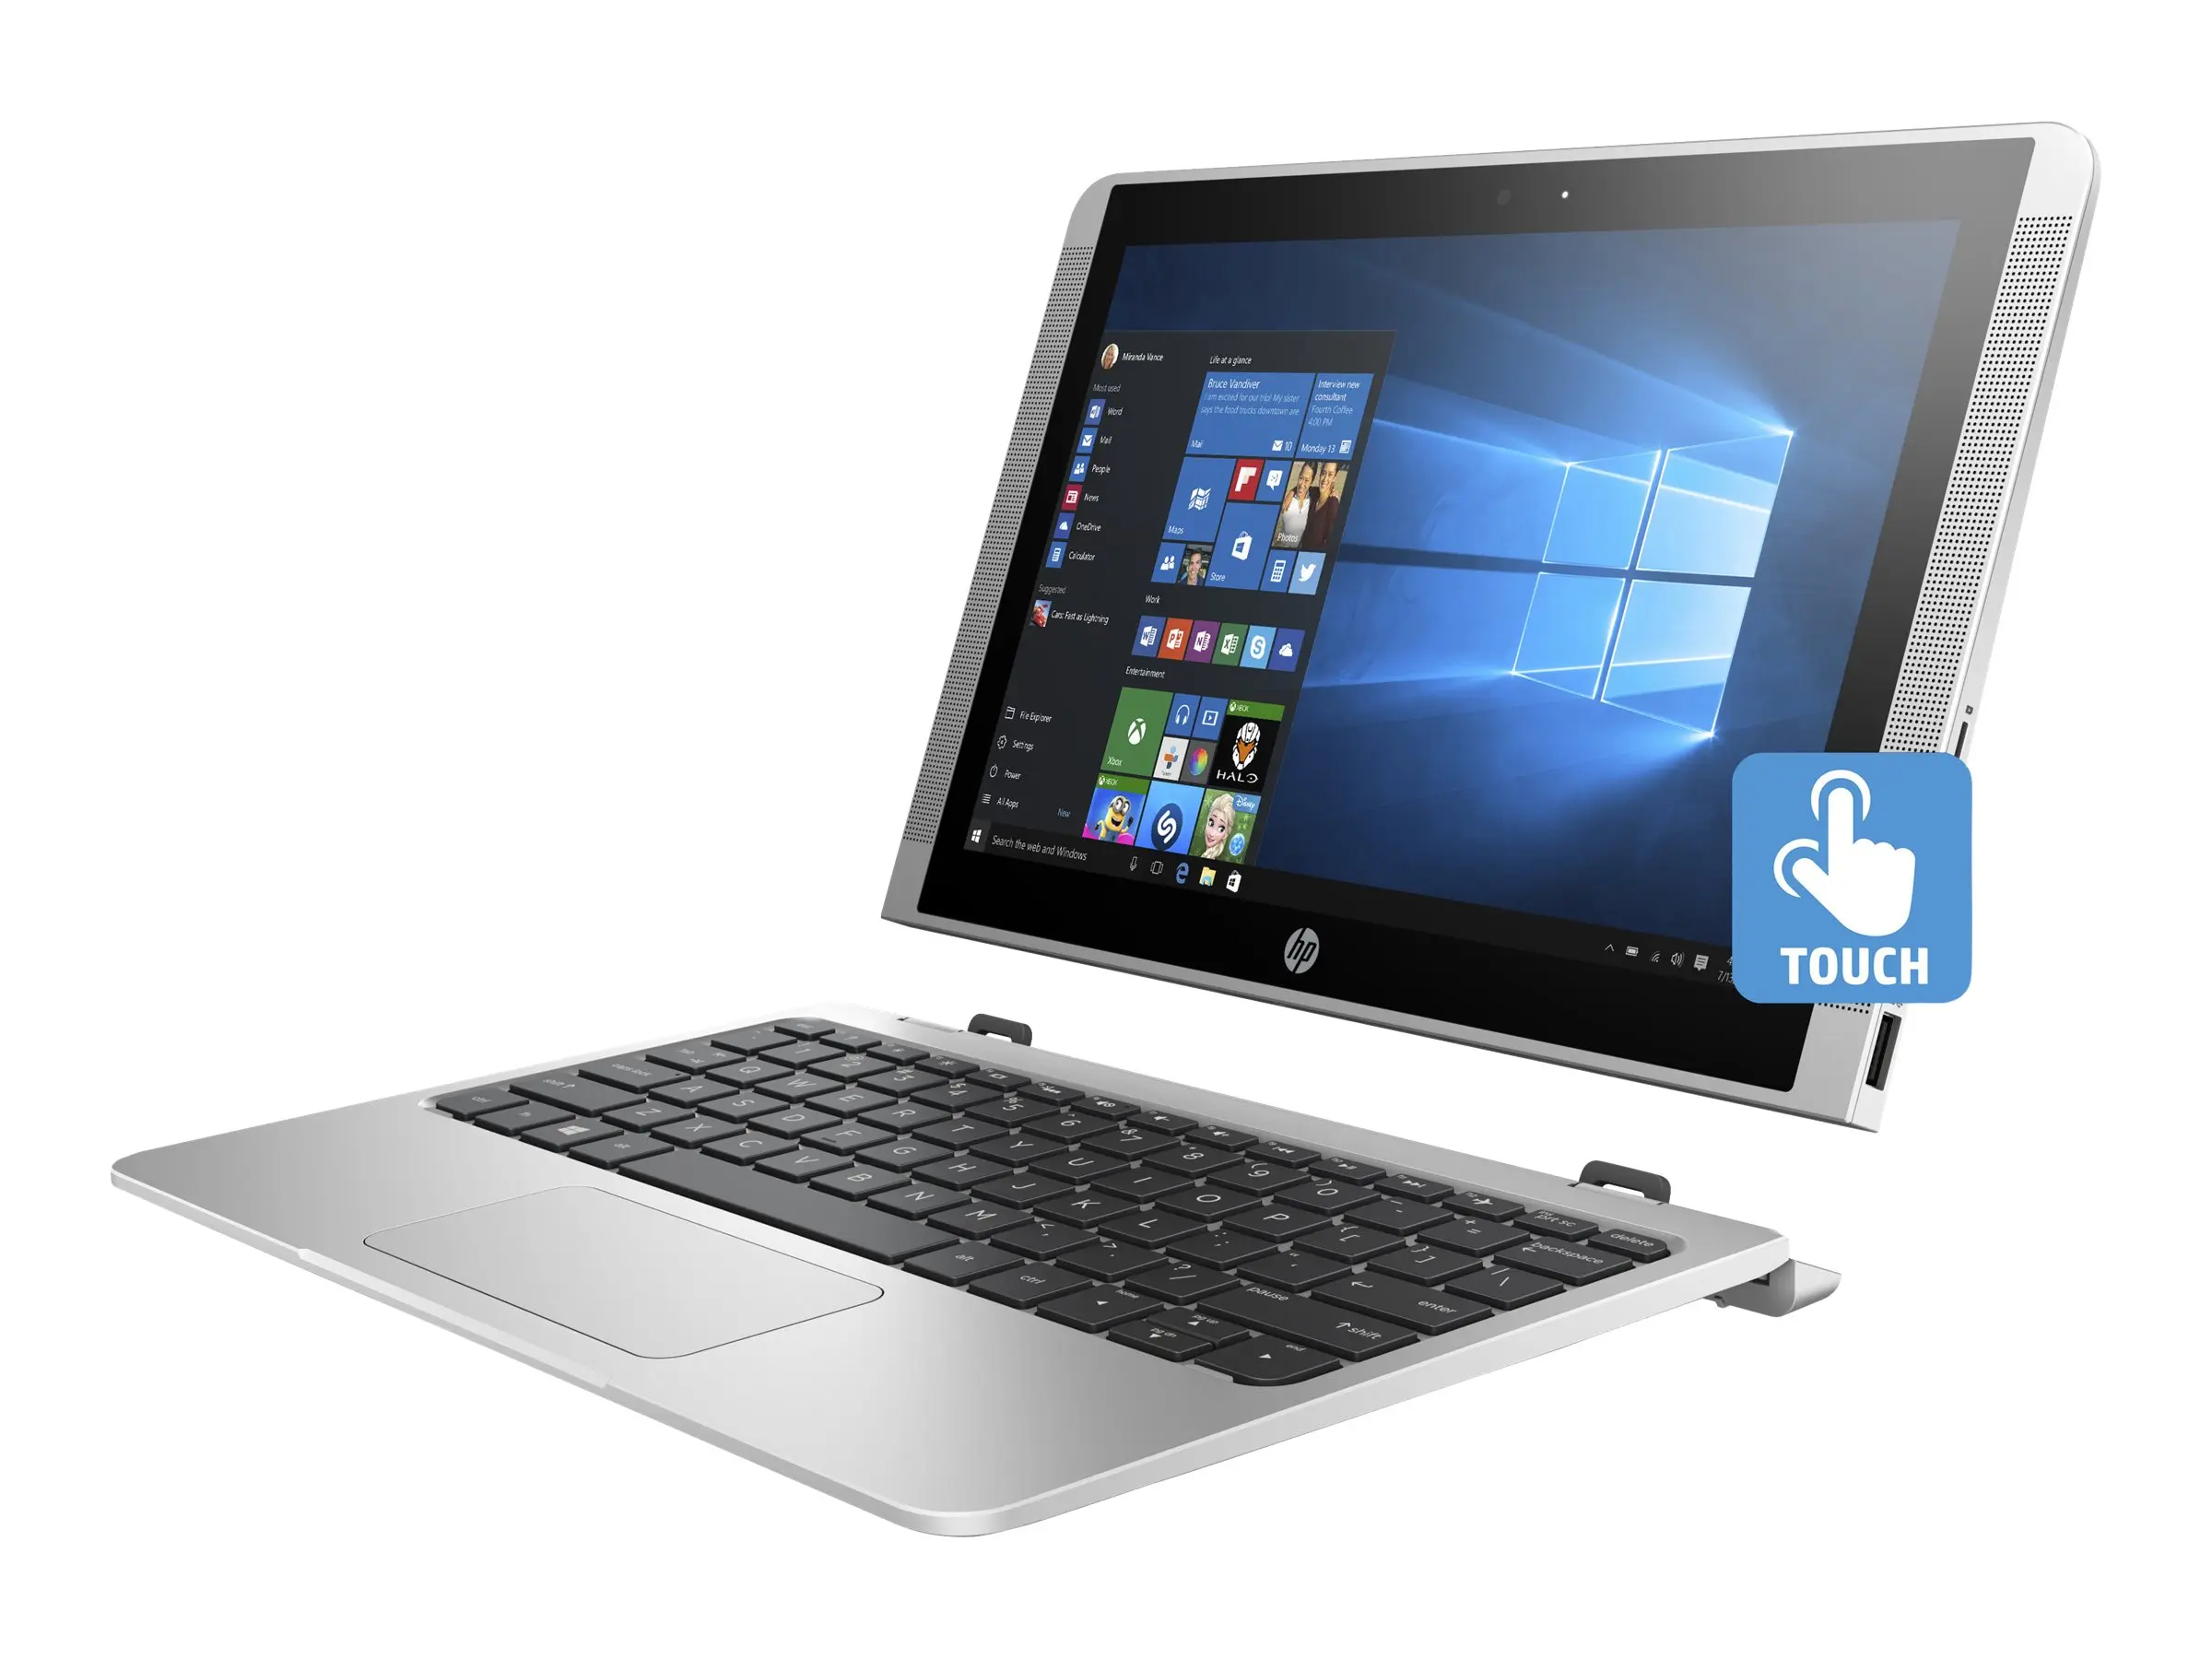 hewlett packard detachable laptop with stand - Are HP laptops detachable